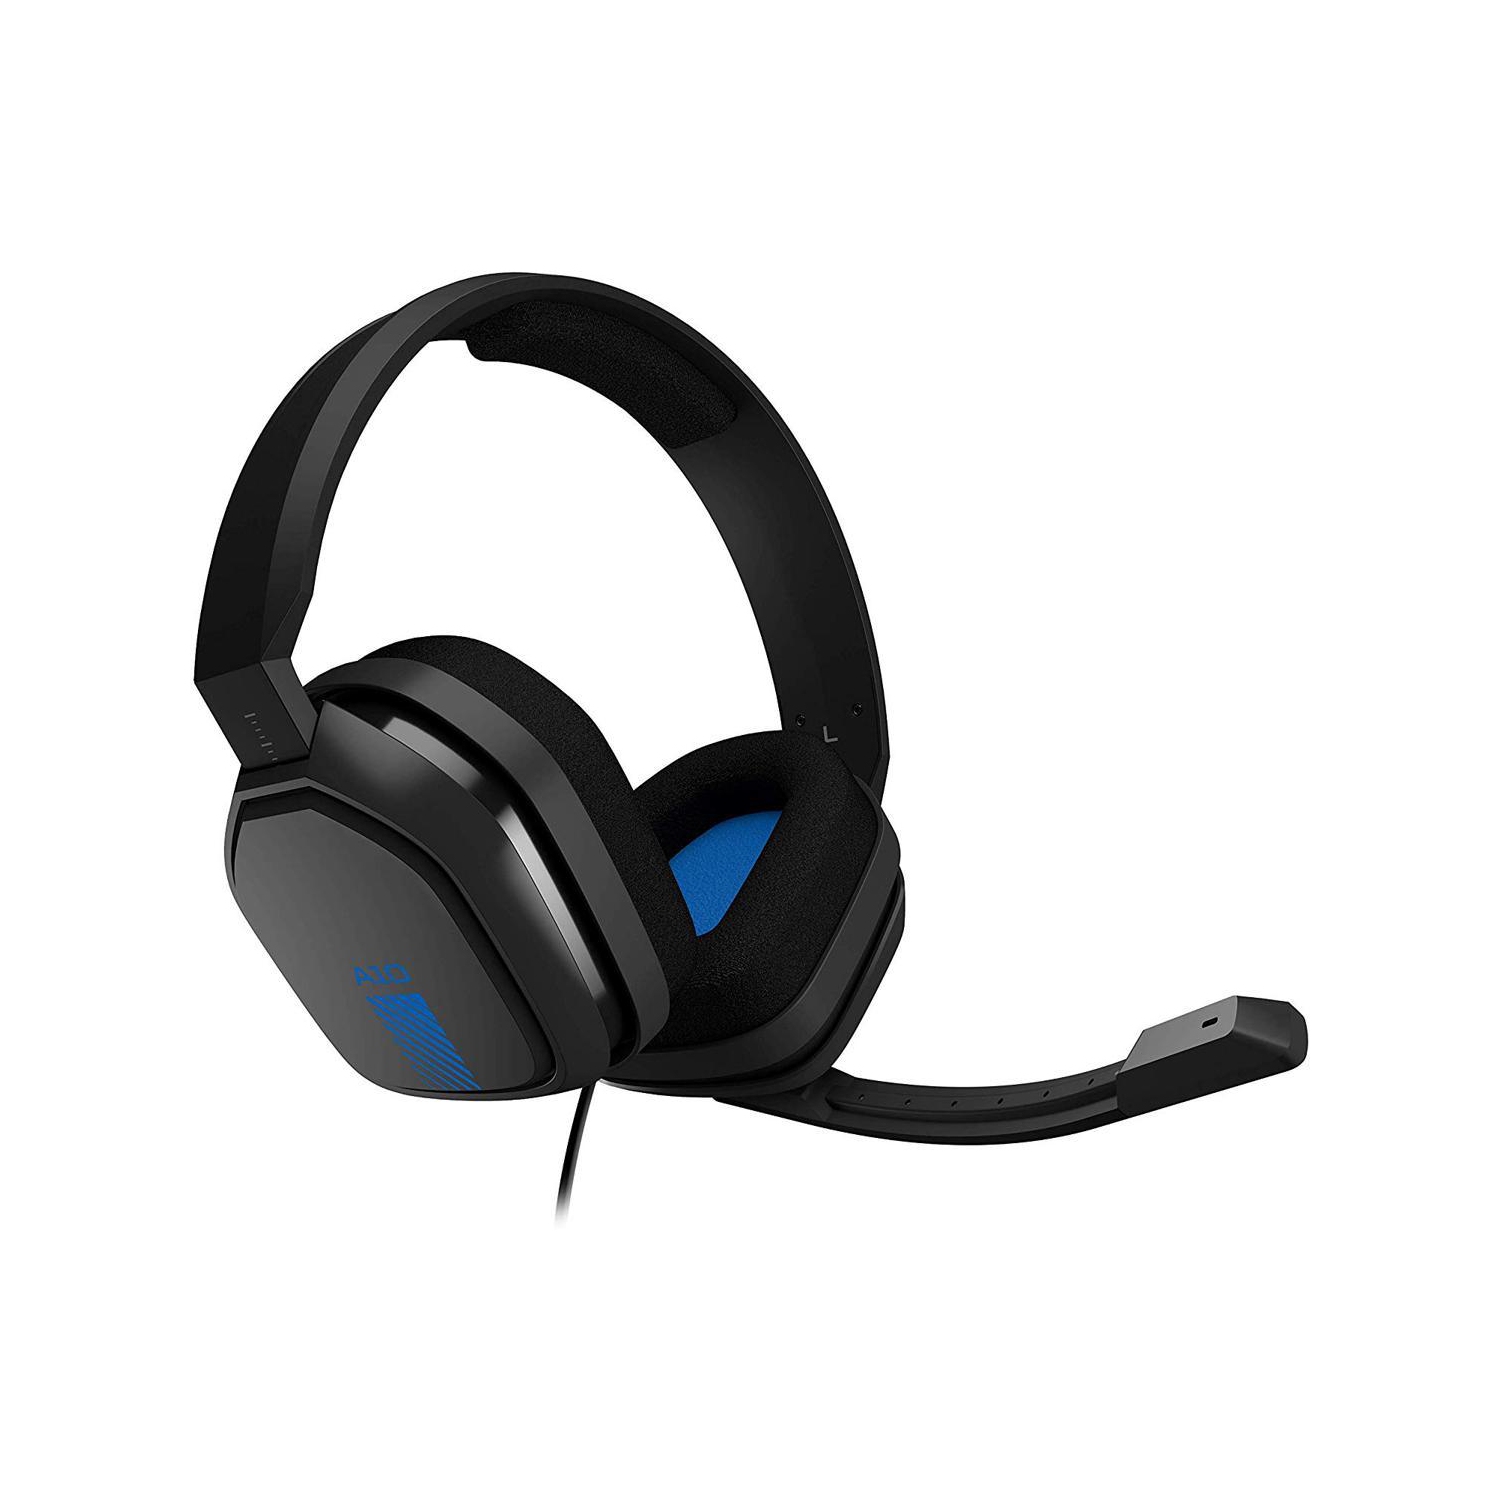 GAMING HEADSET ASTRO Gaming A10 Gaming Headset, Blue (PlayStation 4)